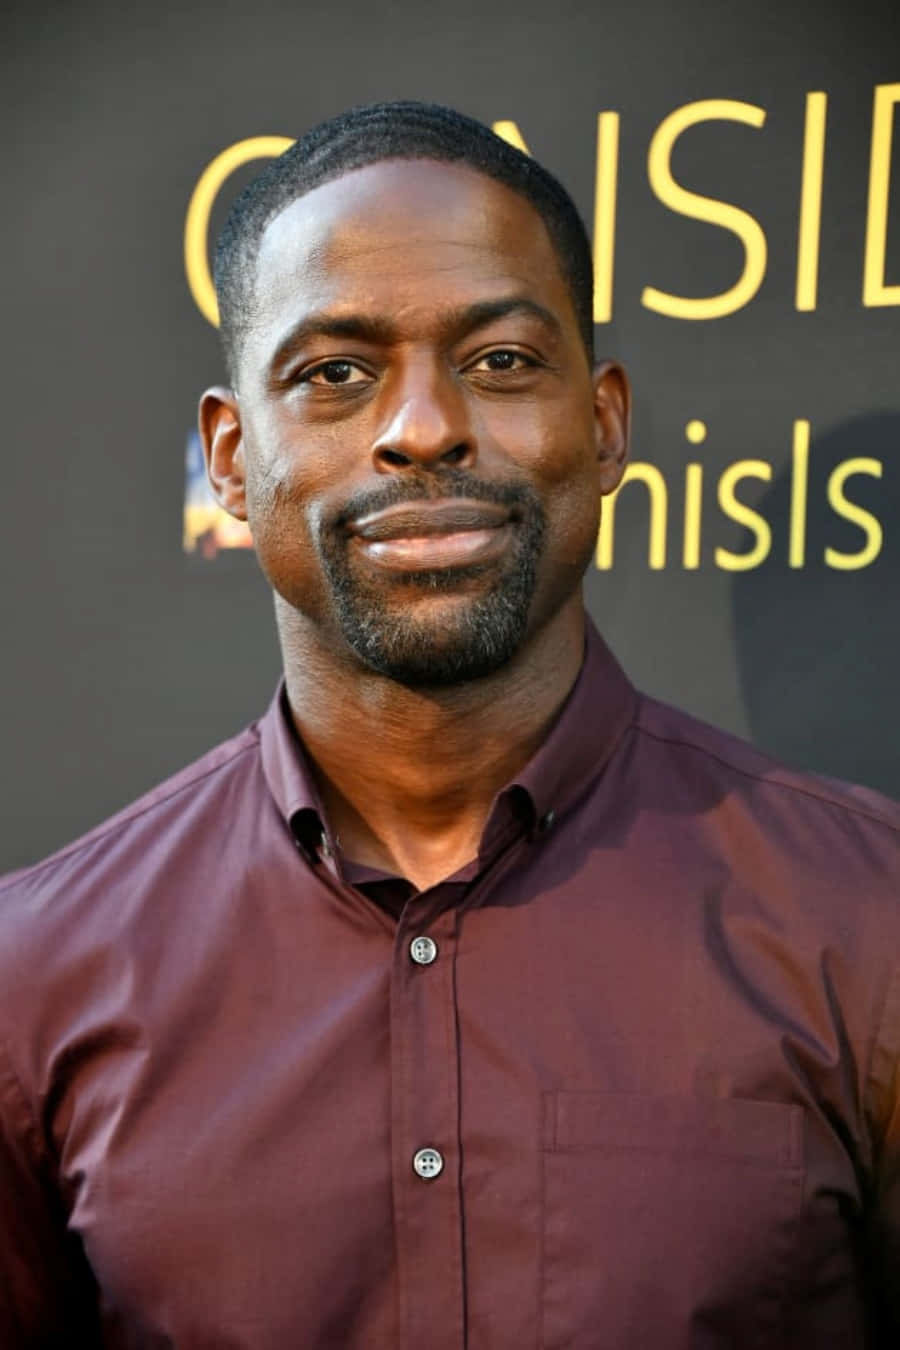 Caption: Award-winning actor Sterling K. Brown in a stylish suit. Wallpaper